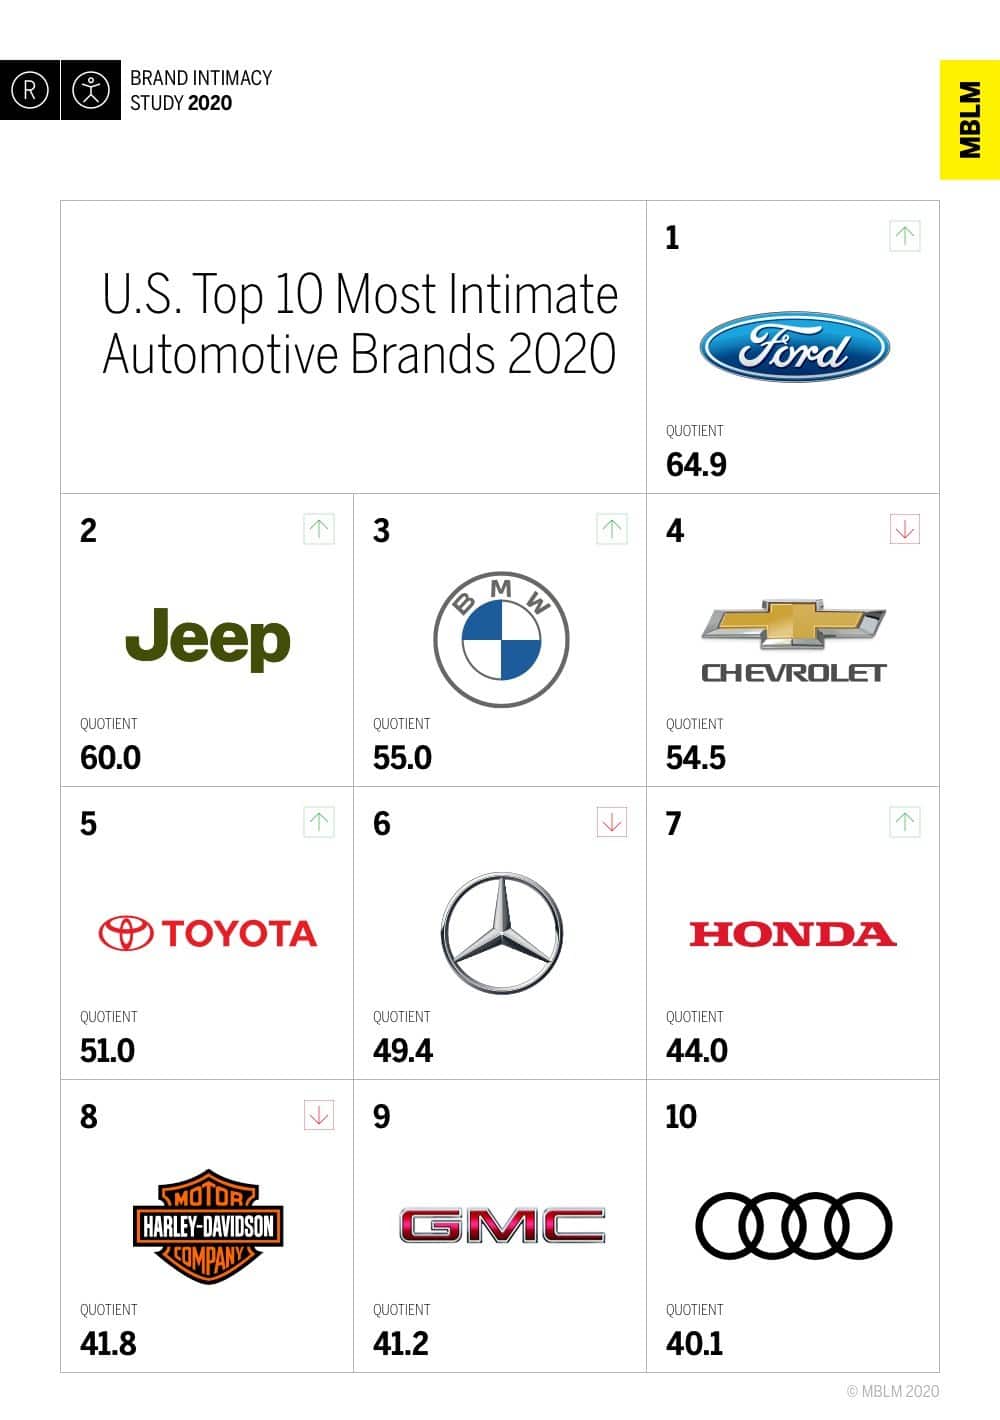 Automotive industry ranks #2 in brand intimacy—which brands lead?